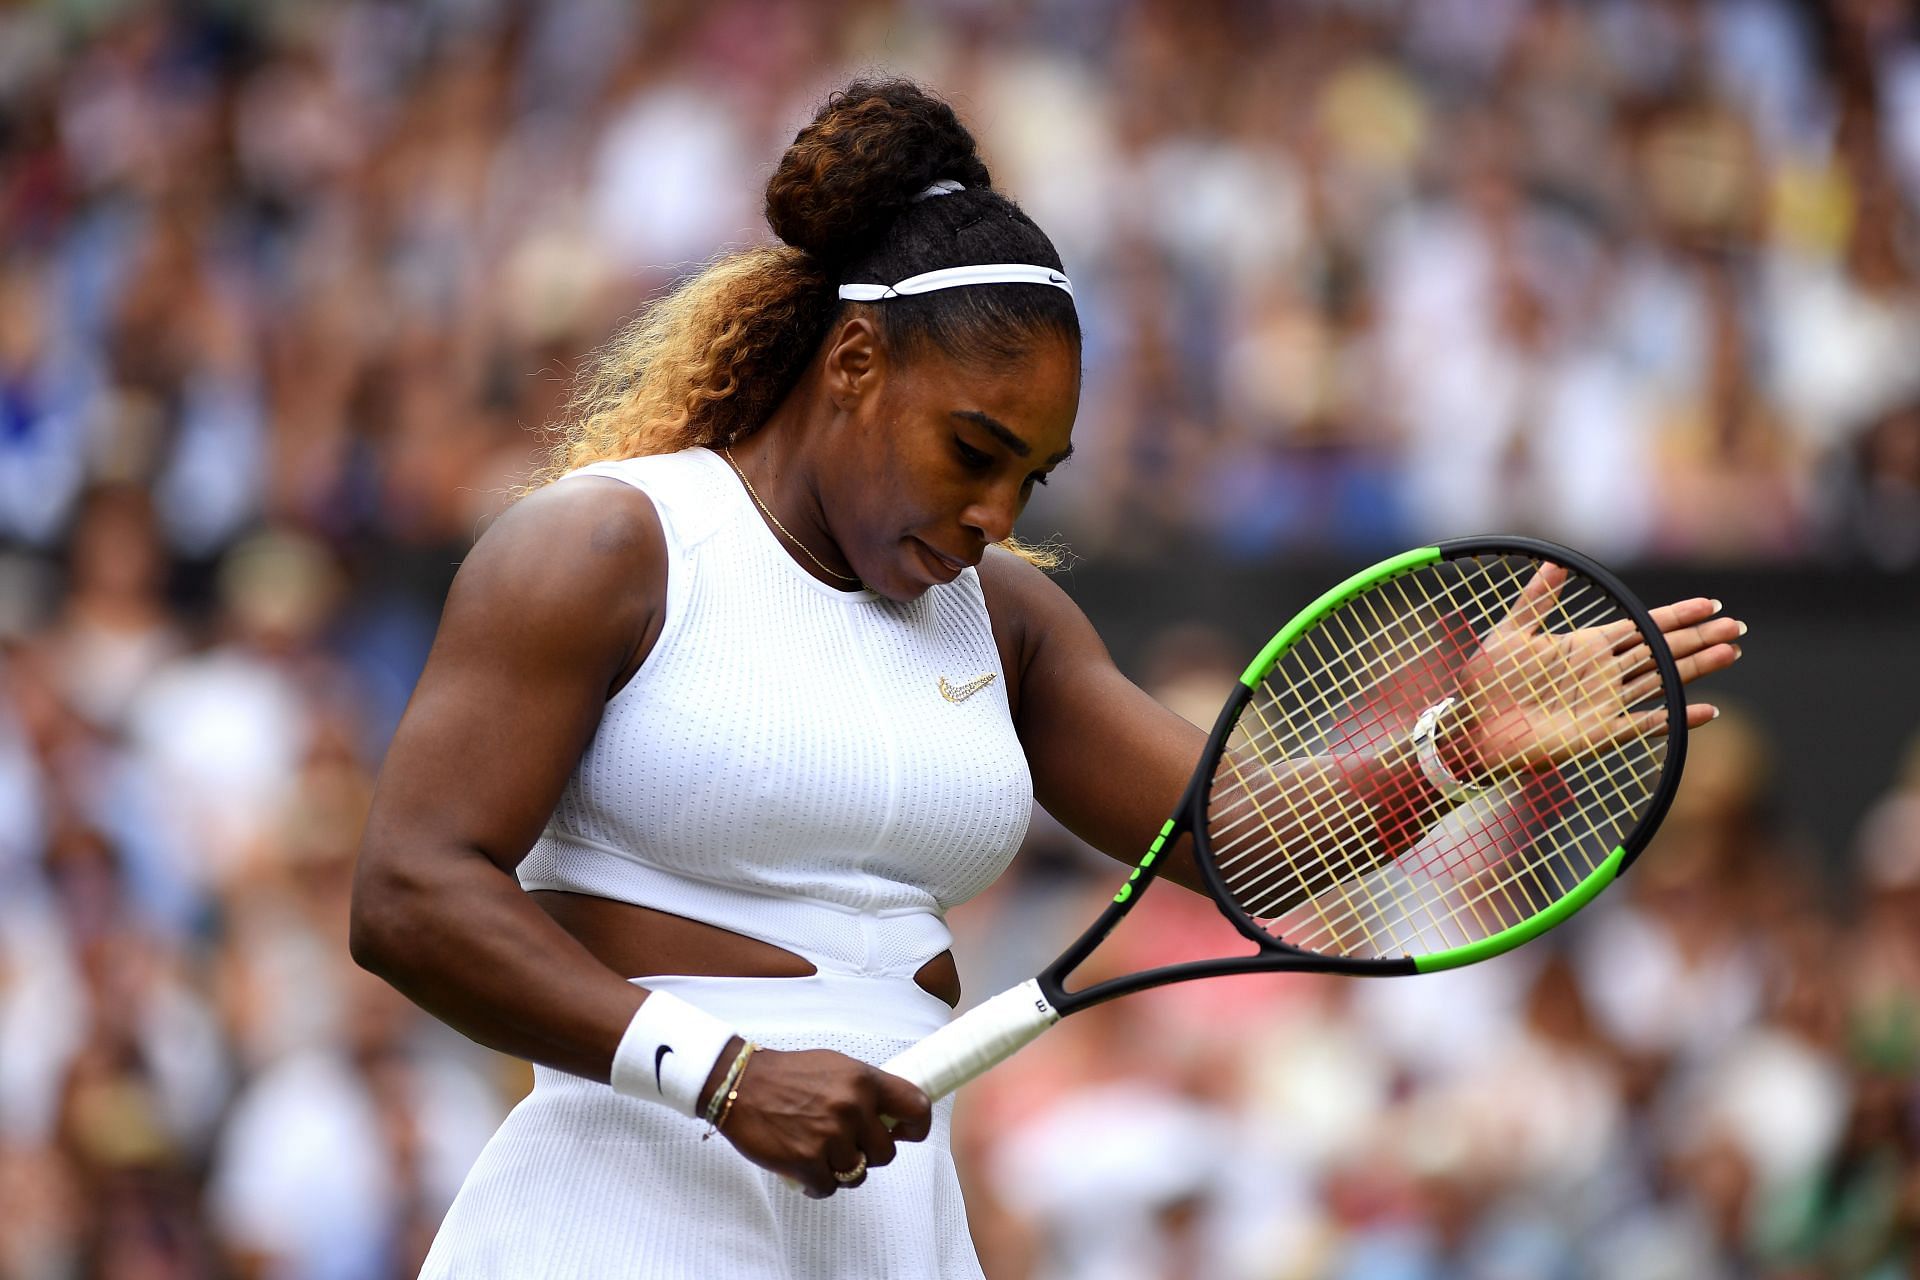 Serena Williams has slipped to World No. 246, her lowest WTA ranking since 2018